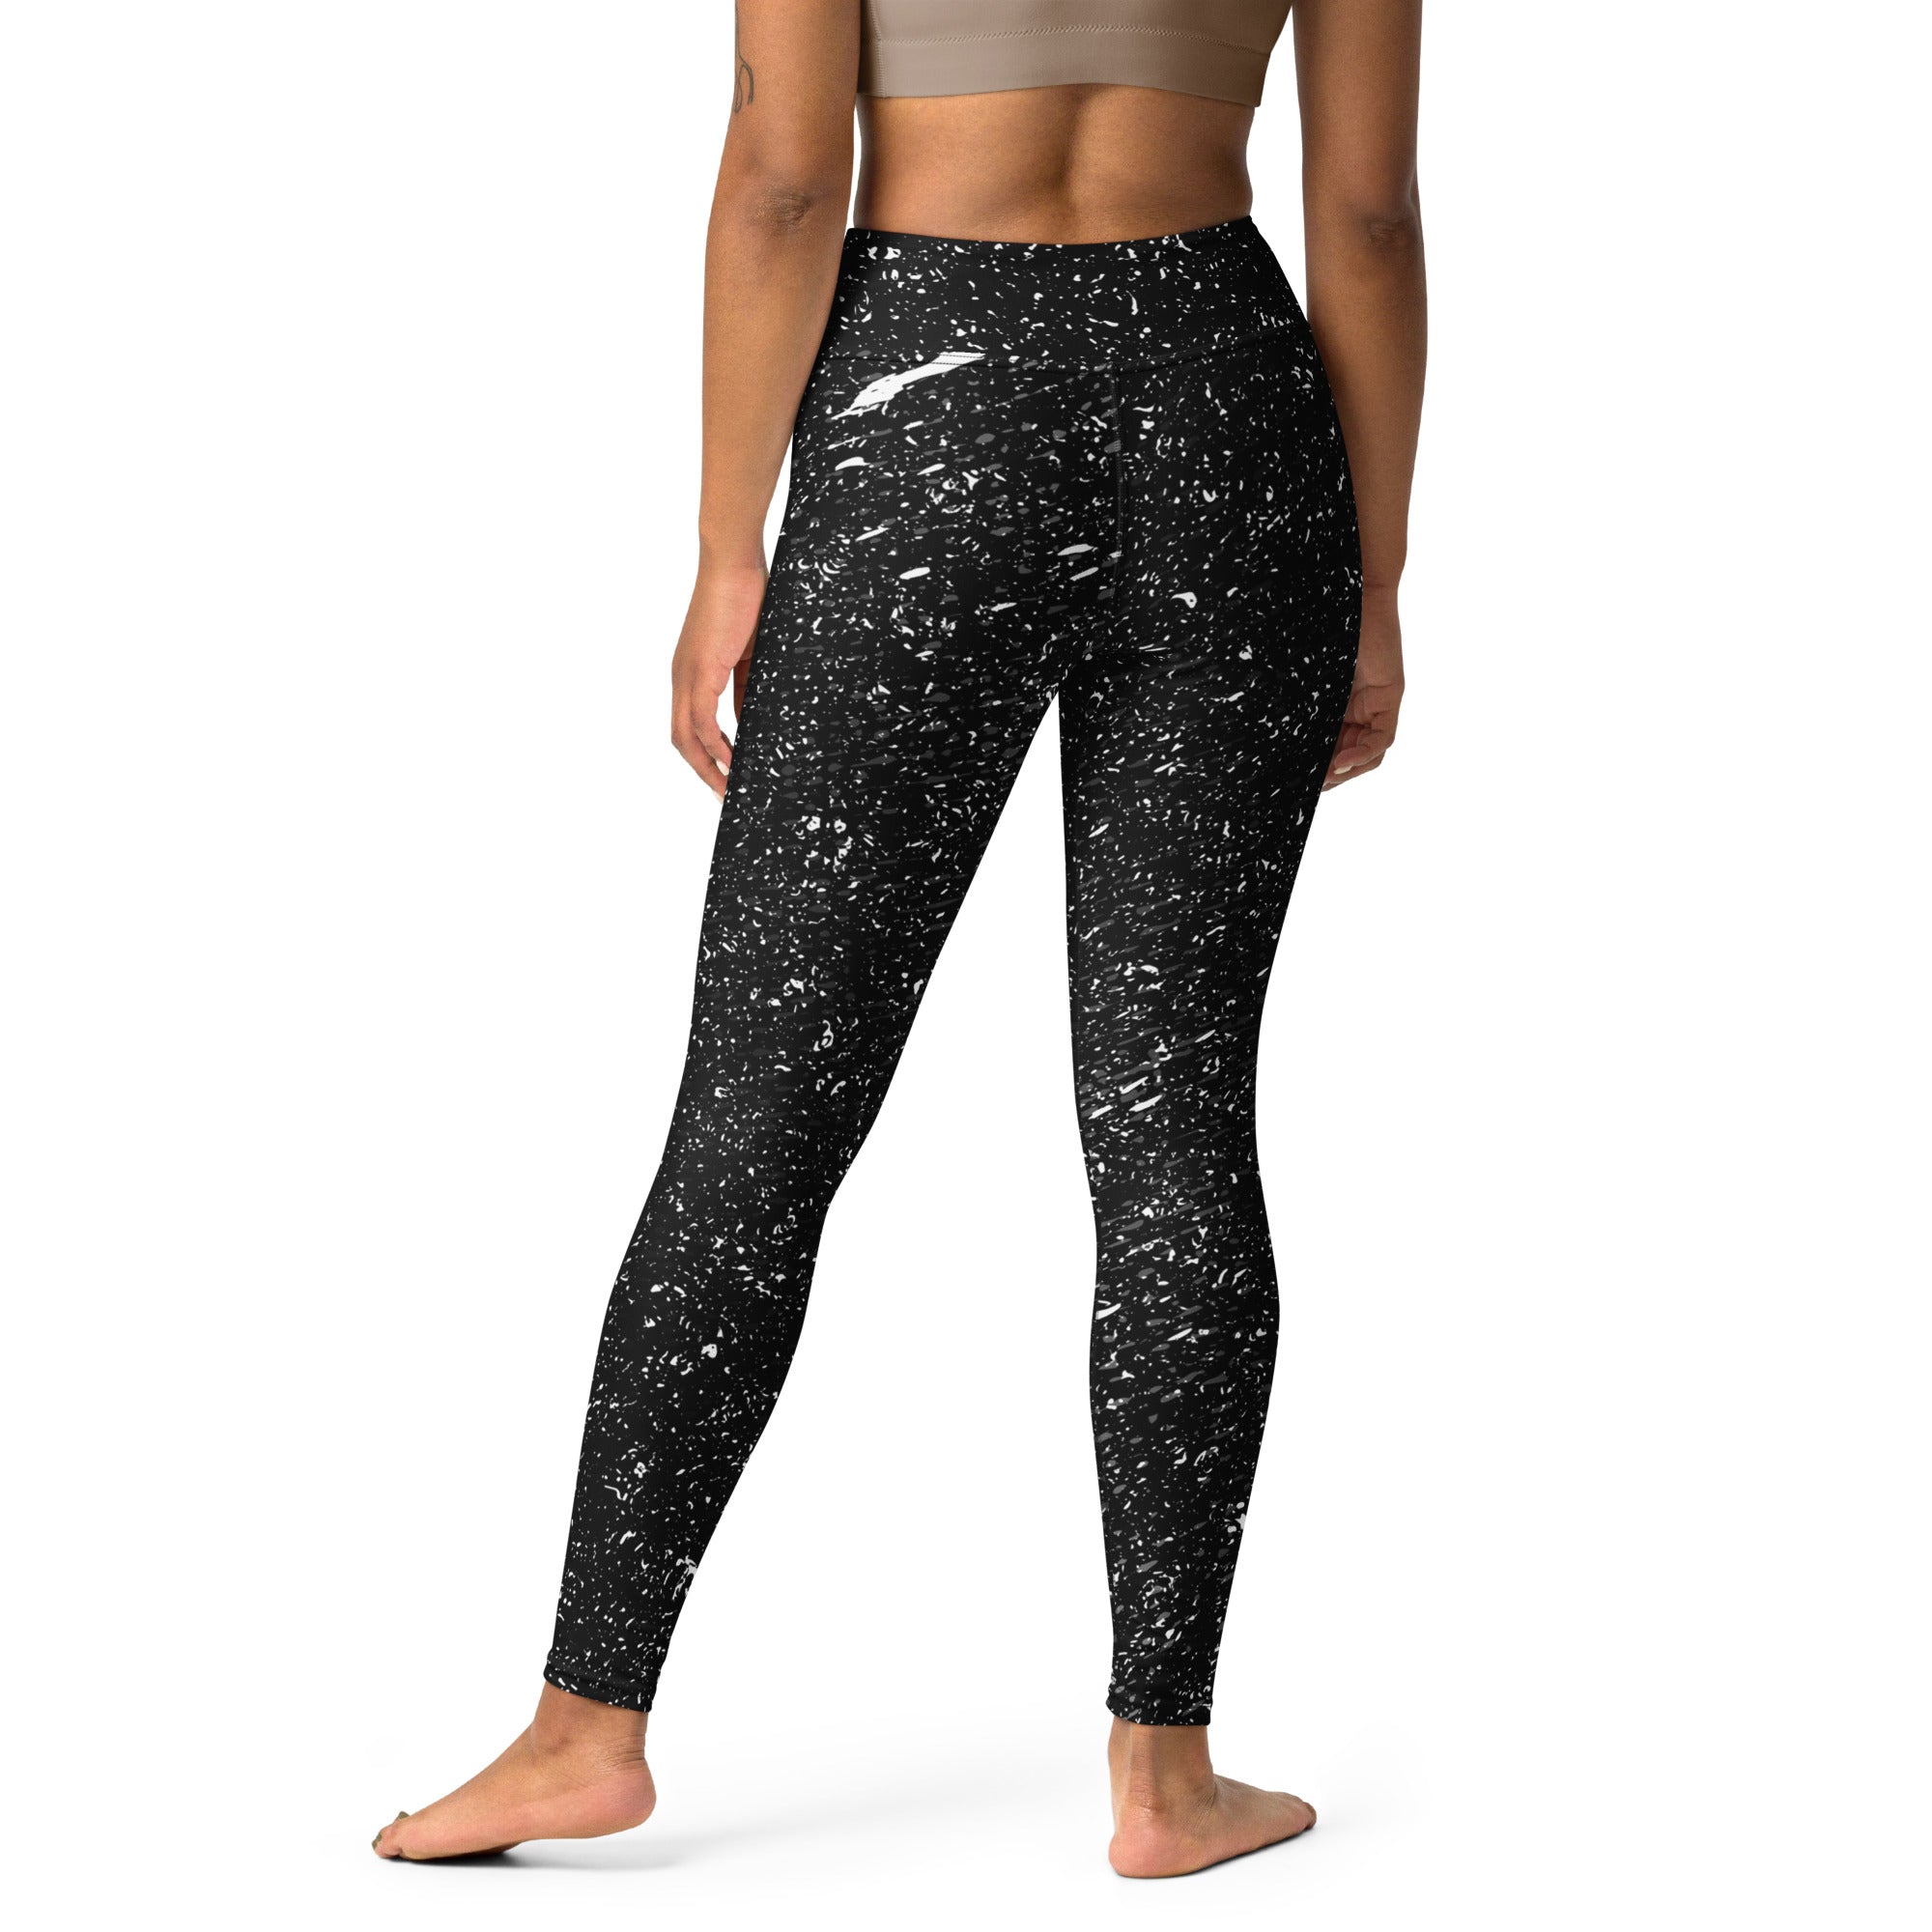 Harmony Flow Yoga Leggings styled with a fitness outfit.